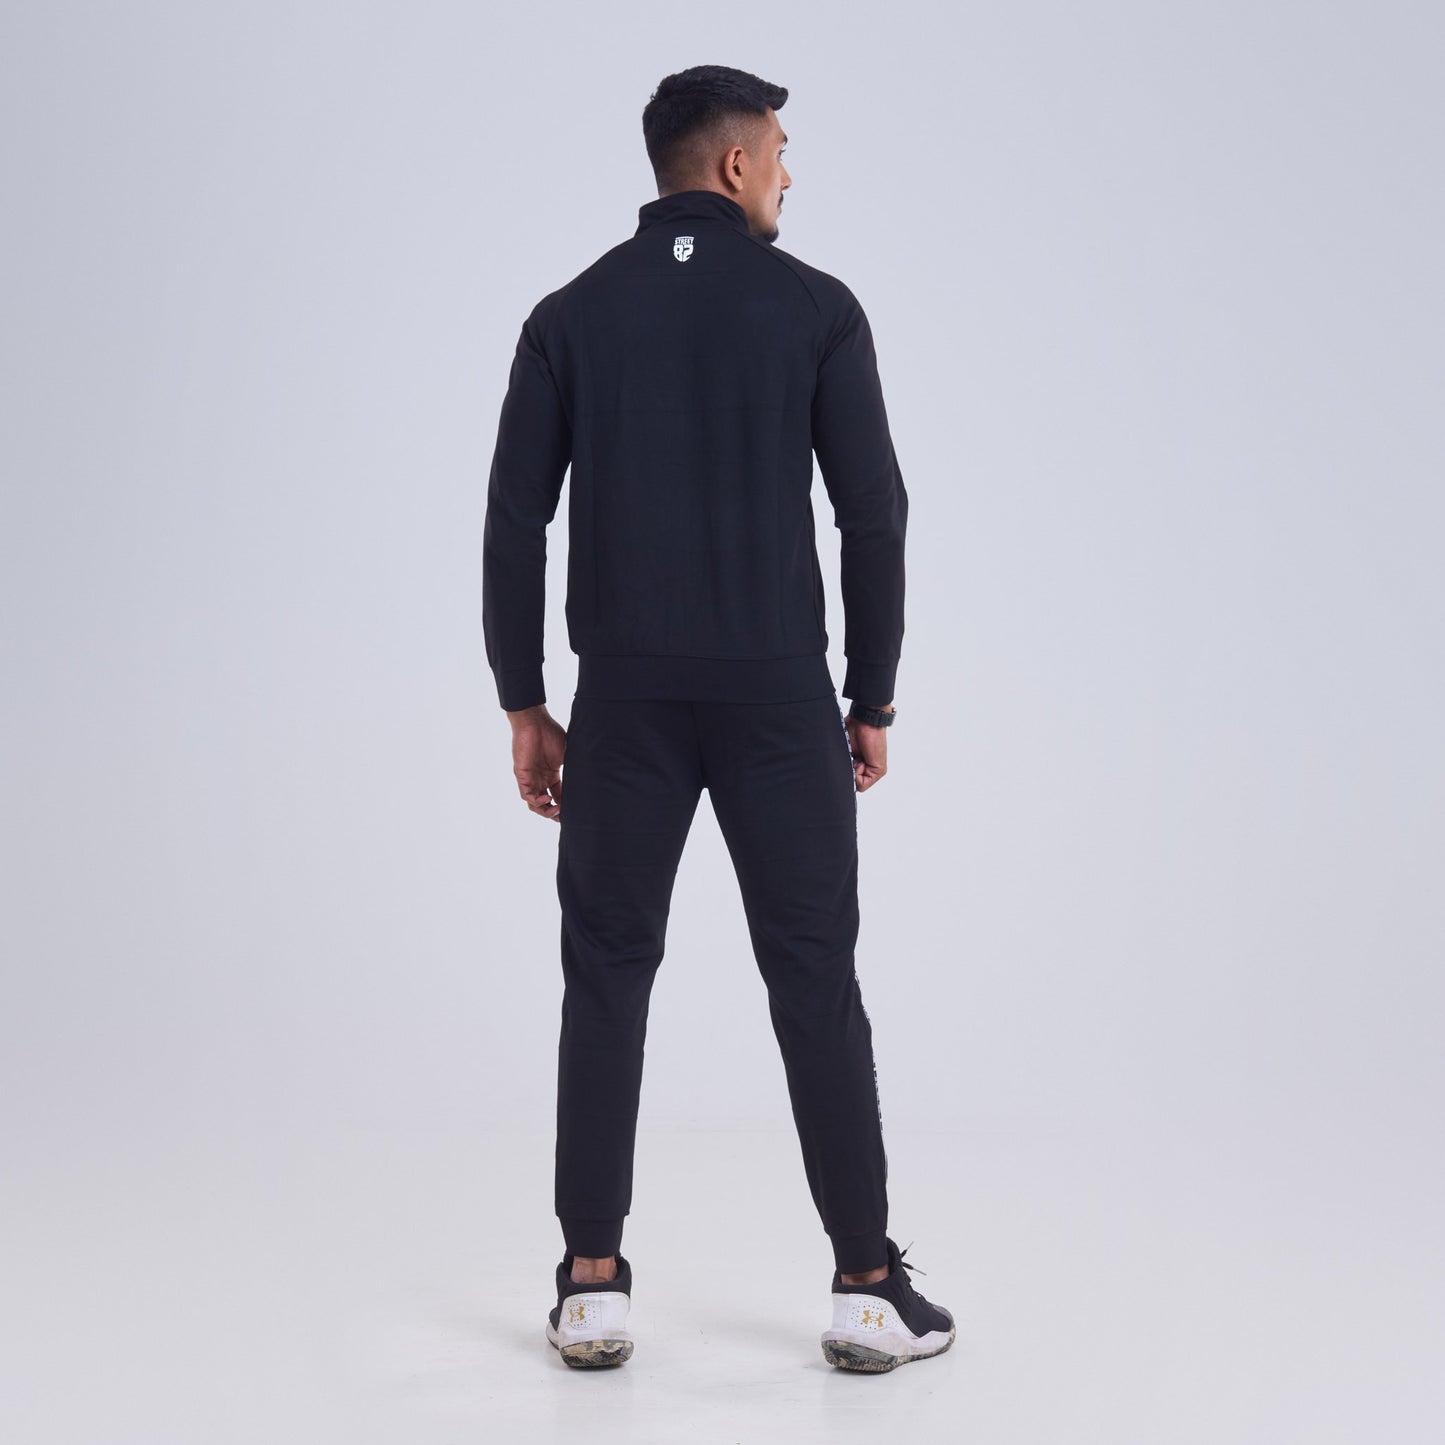 Mens Sports Suit - Long Sleeve Jacket with Woven Tape